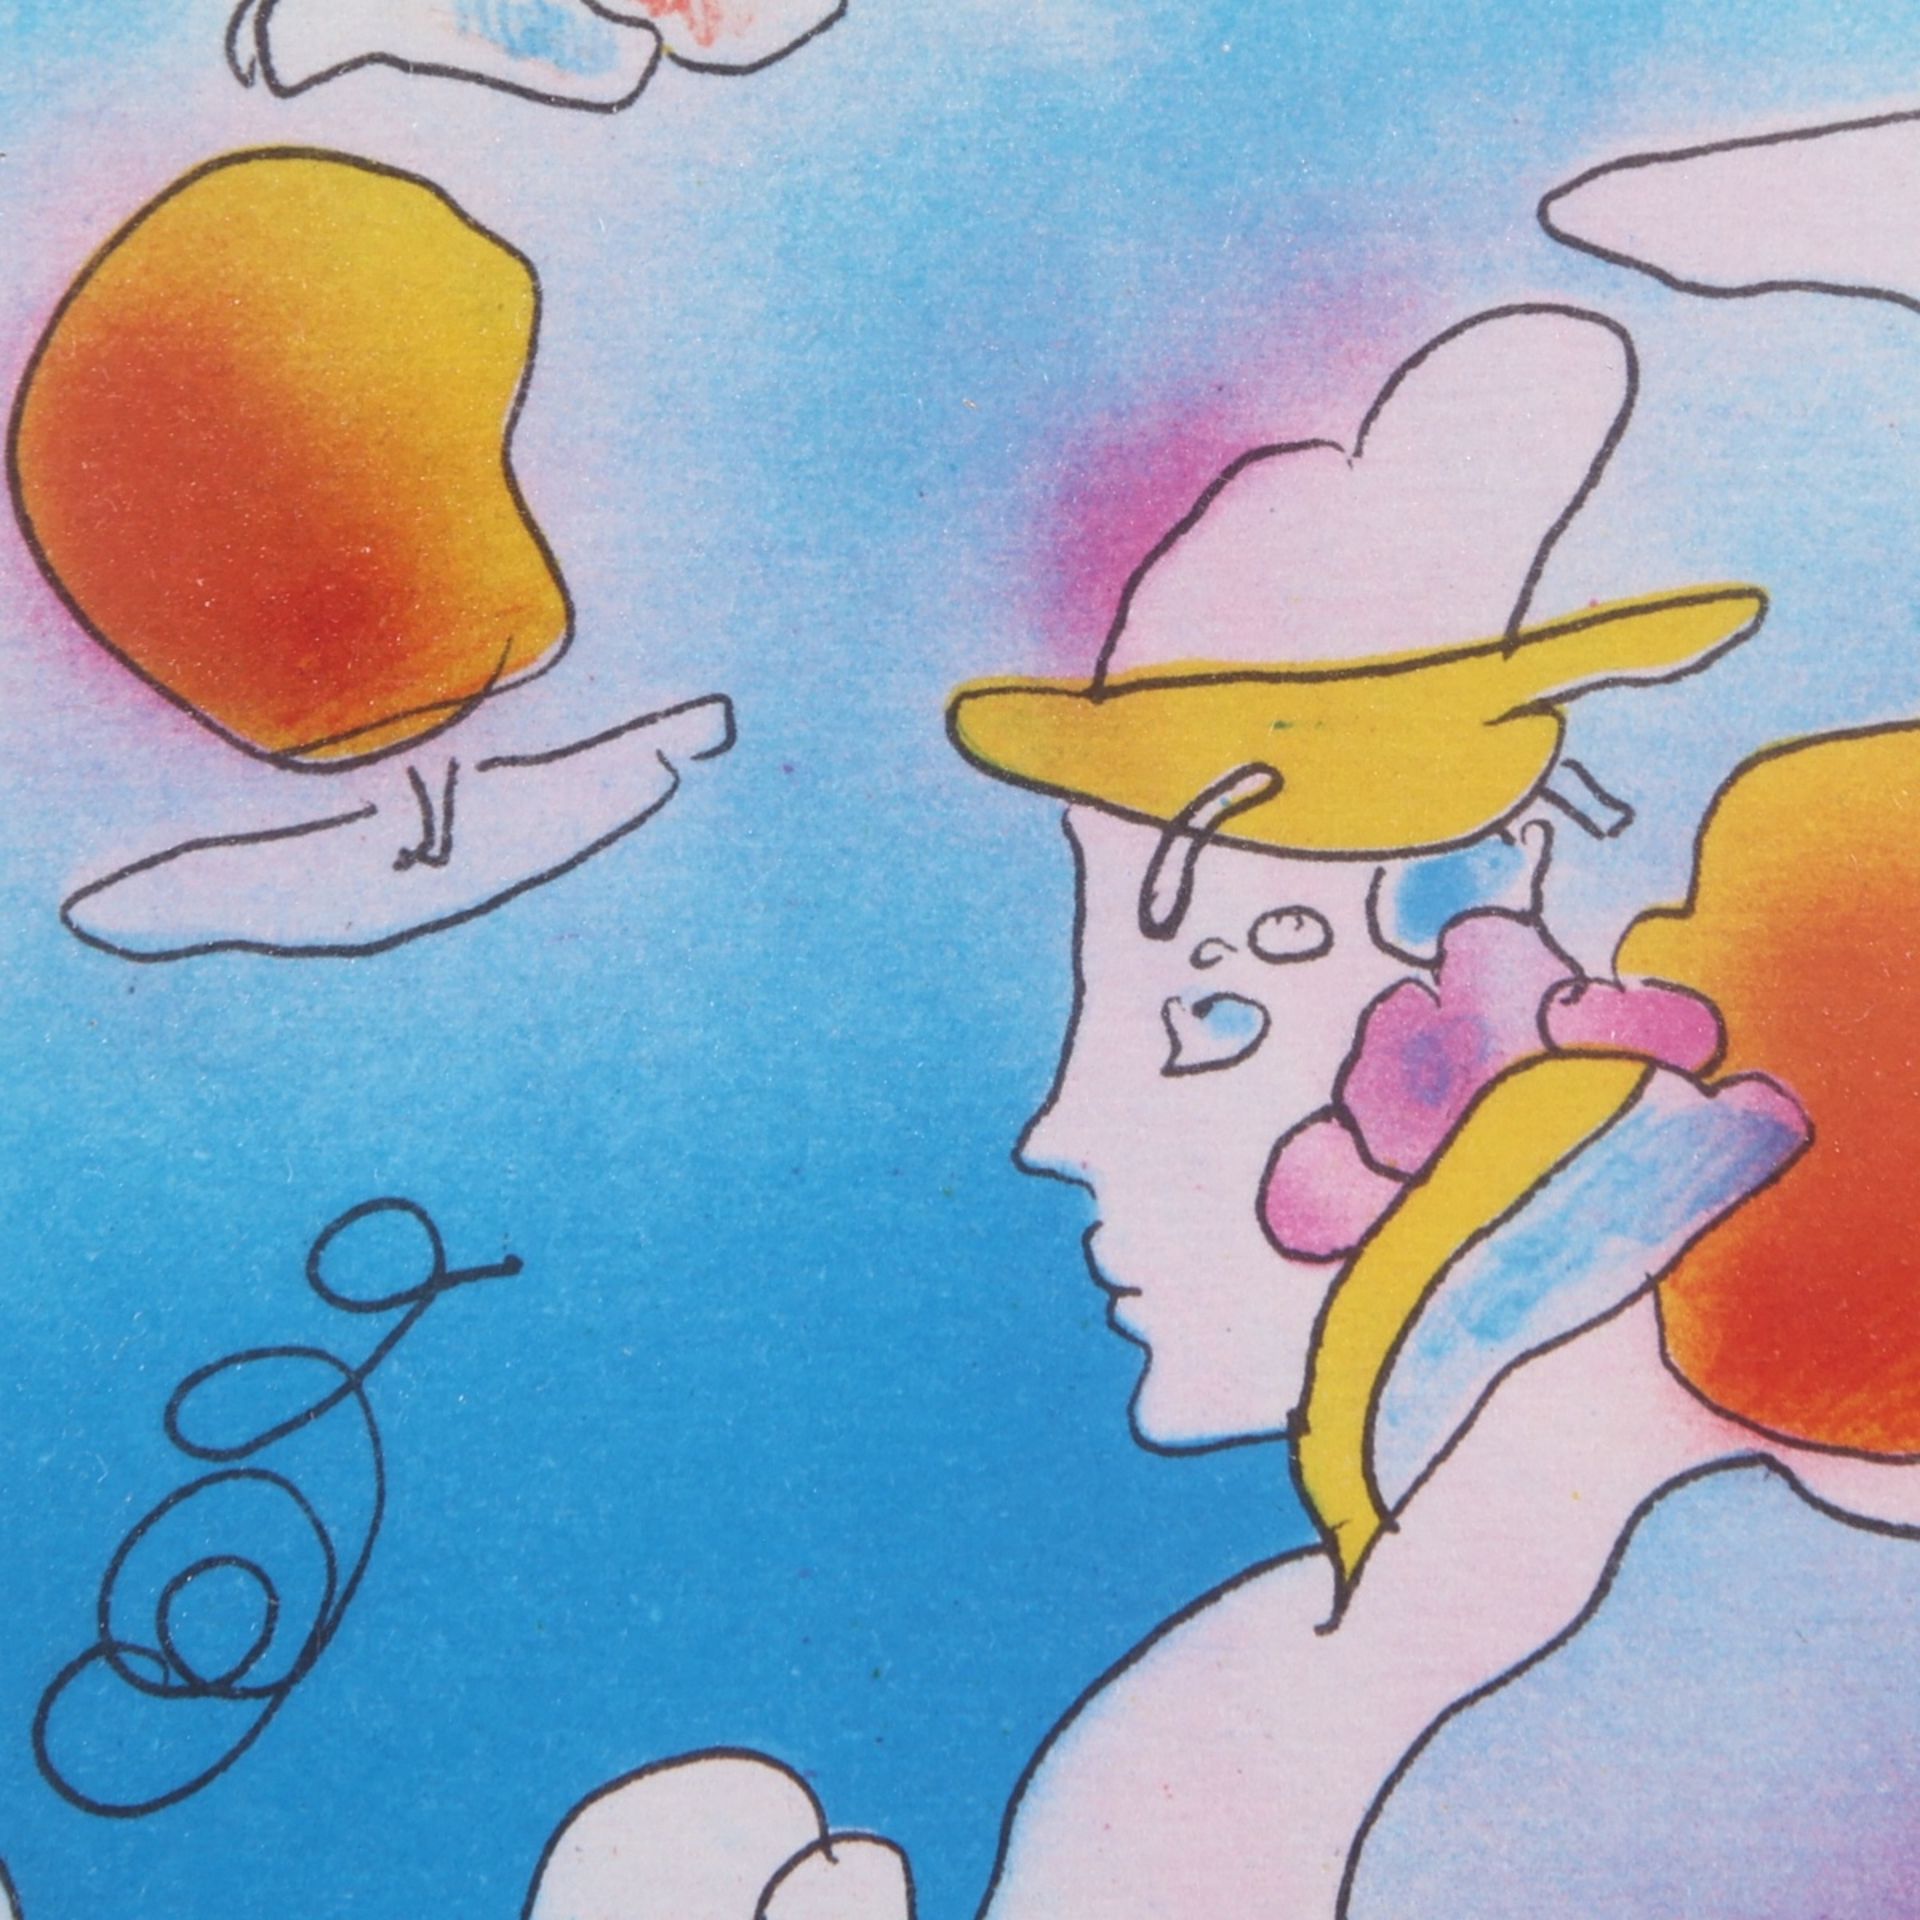 Peter Max "Galactic Man" Lithograph - Image 5 of 5